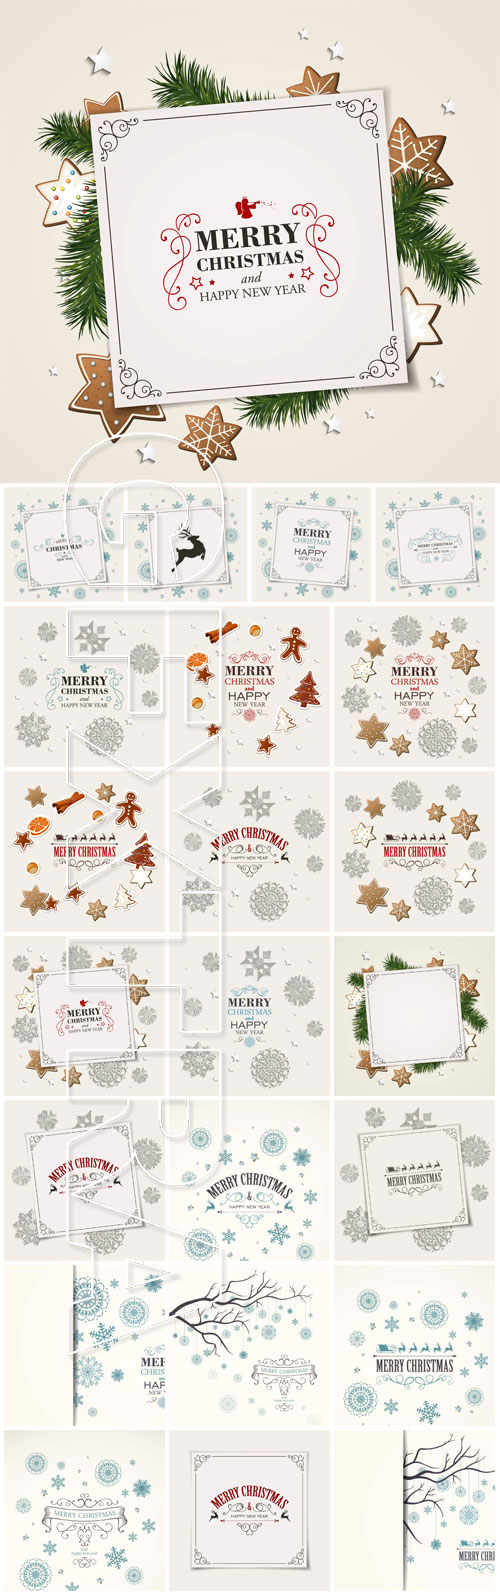 Christmas vector 2016 background with winter elements